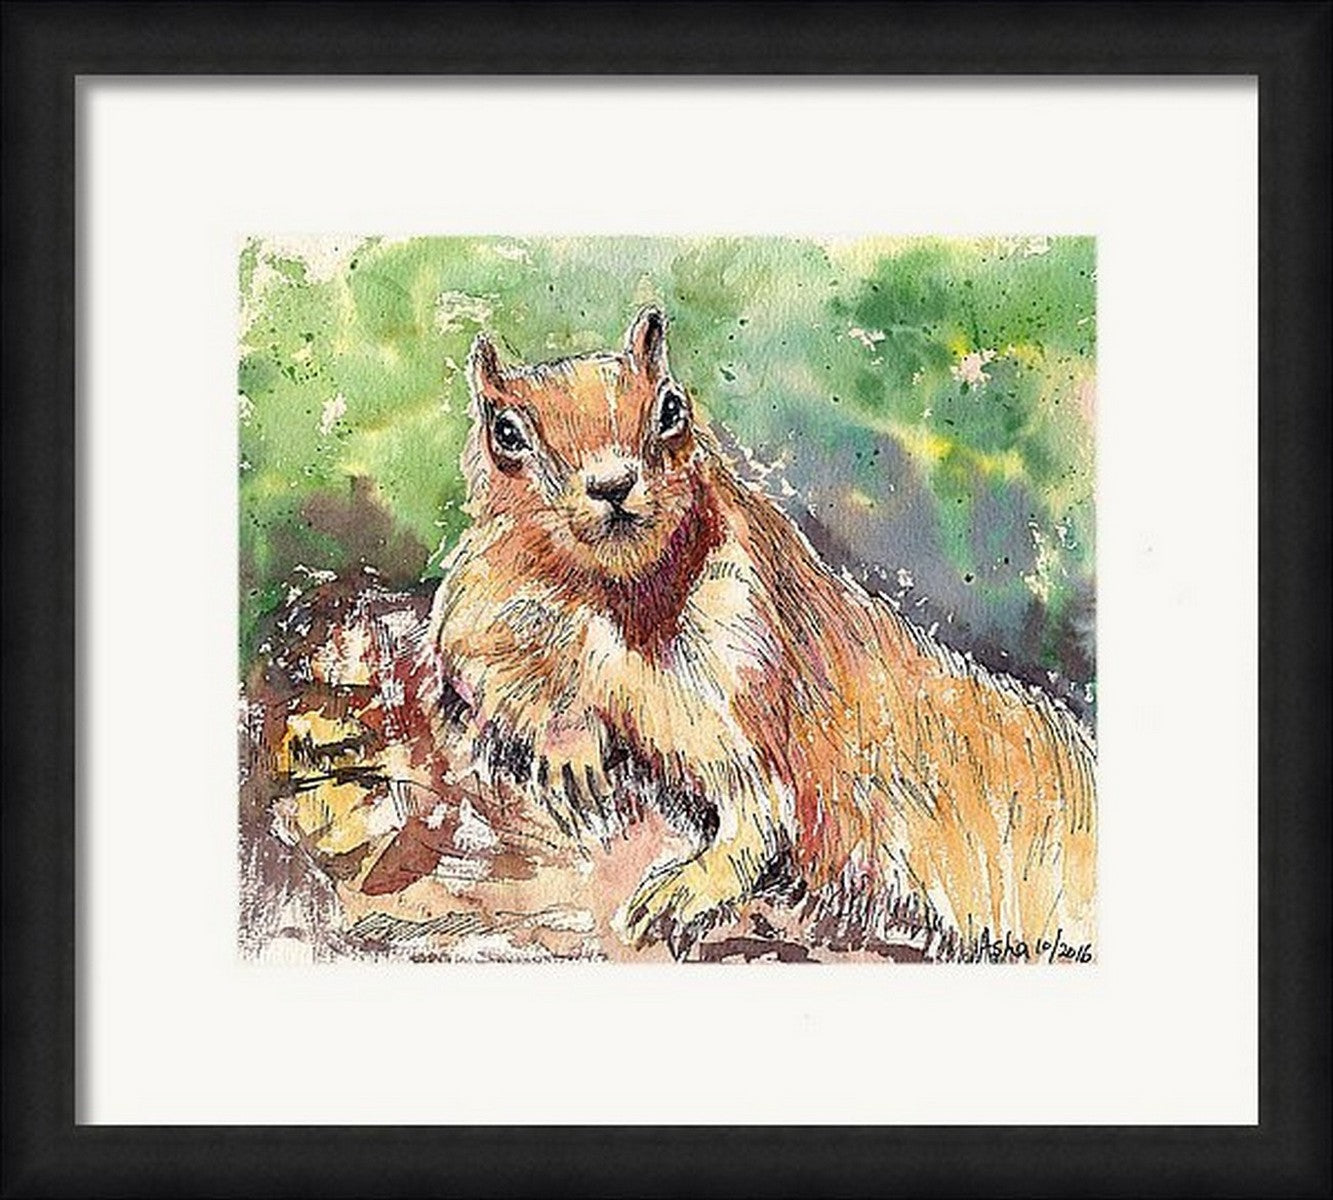 Virtual frame view, Red Squirrel Sunbathing- Ink and watercolor wash on paper